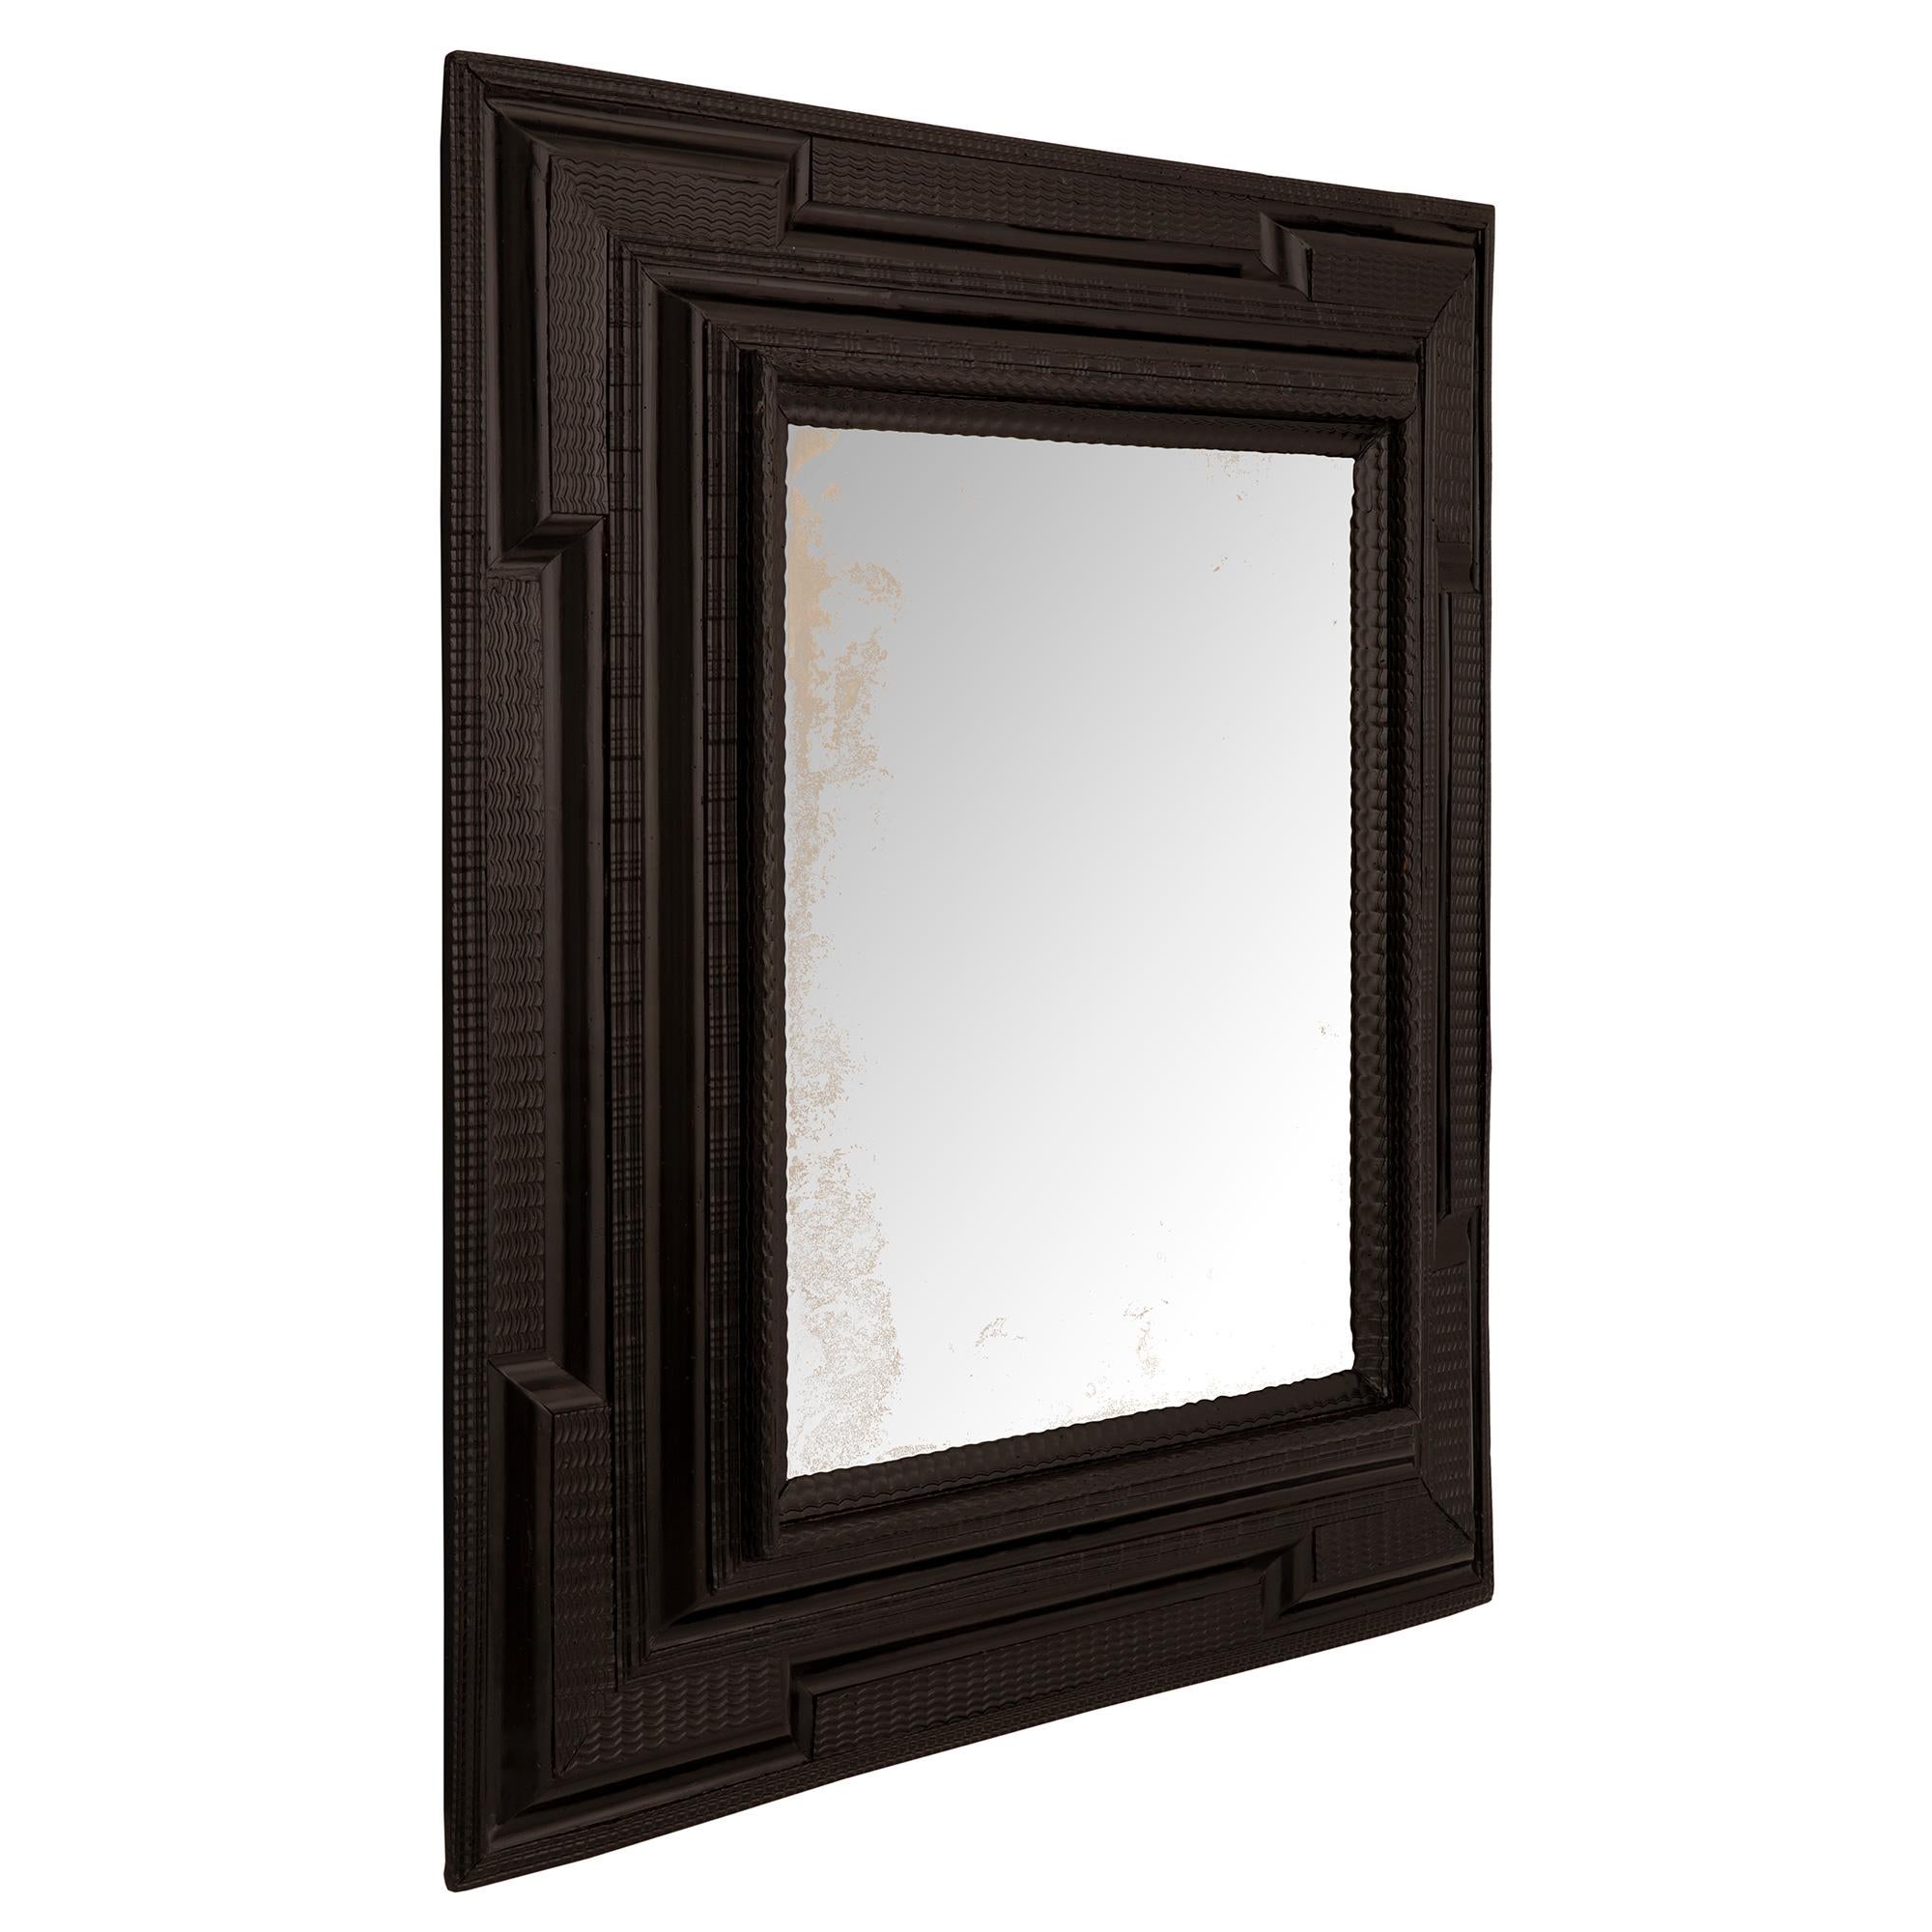 A beautiful and most impressive Italian 17th century ebony Florentine mirror. The original mirror plate is framed within a handsome thick ebony border. The border displays unique finely carved waved designs spread over the most decorative mottled